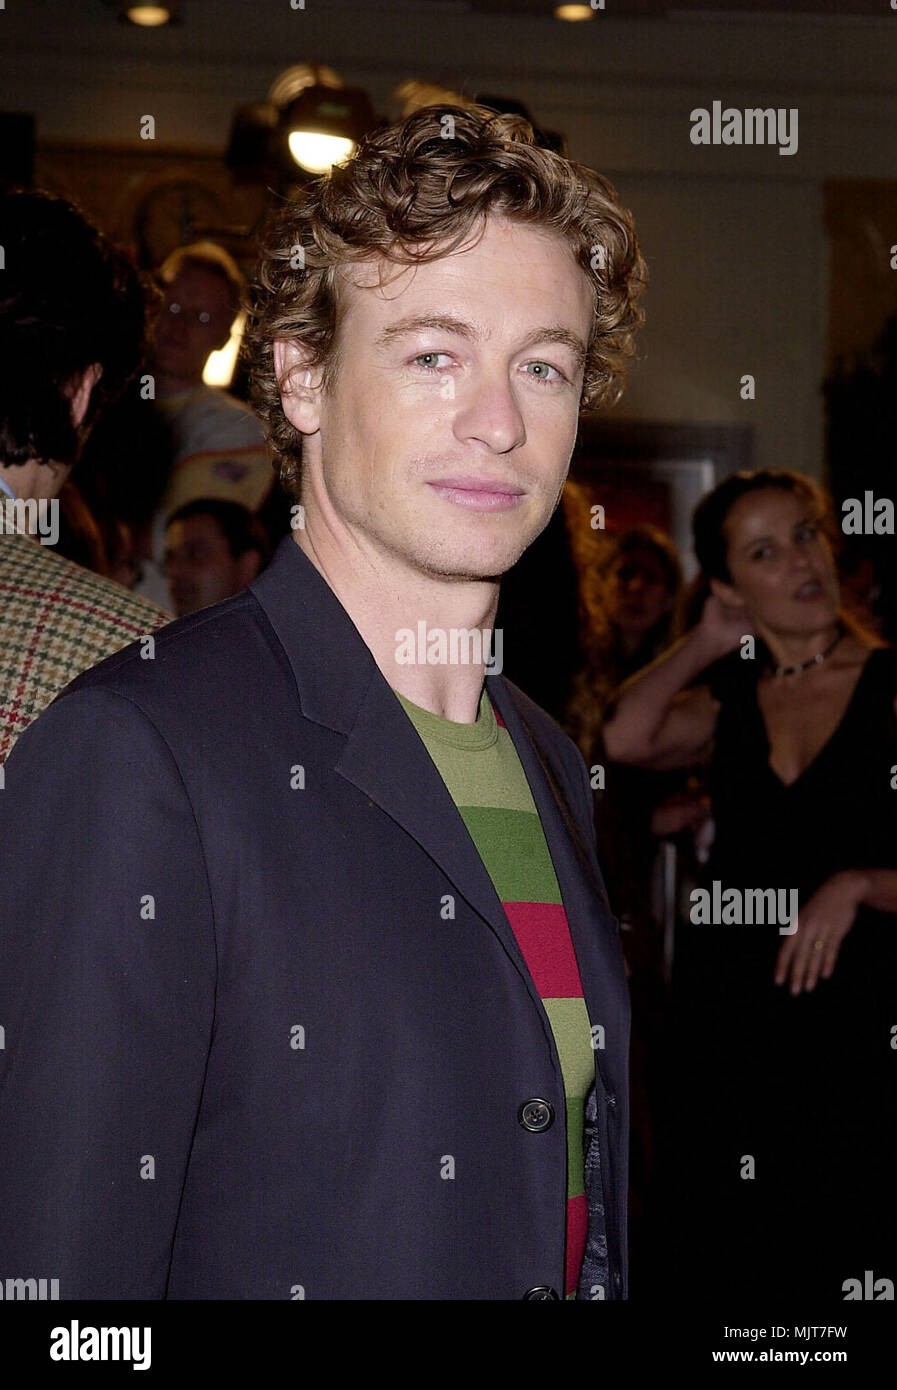 Nov 06, 2000; Los Angeles, CA, USA;  'Red Planet 1e'  was held at the Westwood  Village Theatre in Los Angeles Simon Baker Baker.Simon.13.jpgBaker.Simon.13  Event in Hollywood Life - California,  Red Carpet Event, Vertical, USA, Film Industry, Celebrities,  Photography, Bestof, Arts Culture and Entertainment, Topix Celebrities fashion /  from the Red Carpet-1994-2000, one person, Vertical, Best of, Hollywood Life, Event in Hollywood Life - California,  Red Carpet and backstage, USA, Film Industry, Celebrities,  movie celebrities, TV celebrities, Music celebrities, Photography, Bestof, Arts Cul Stock Photo